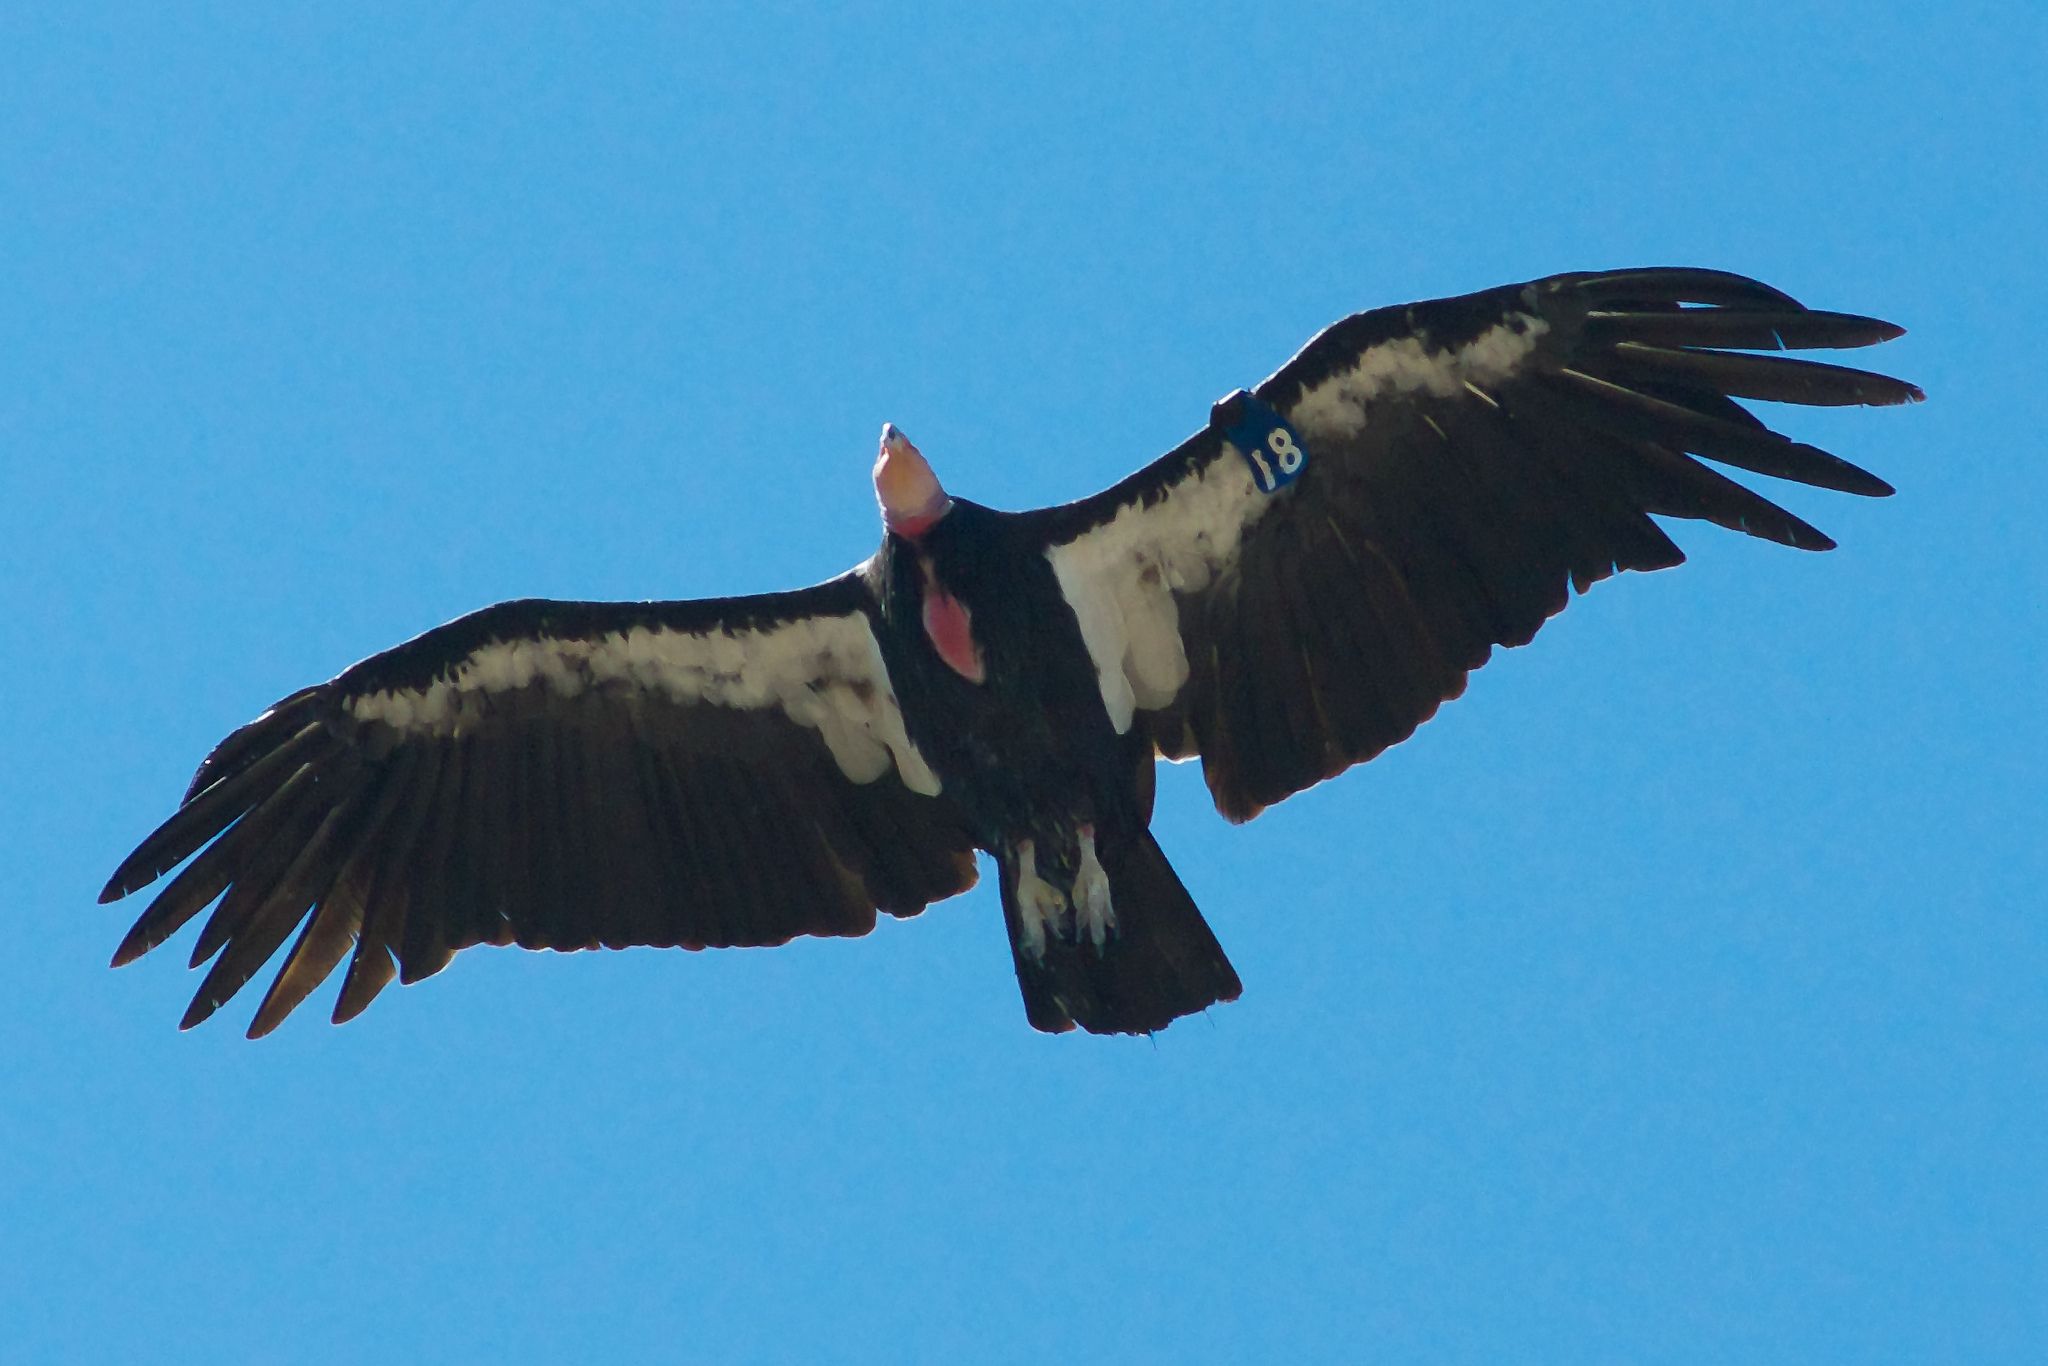 A California Condor with its wings spread, sailing against a blue sky.